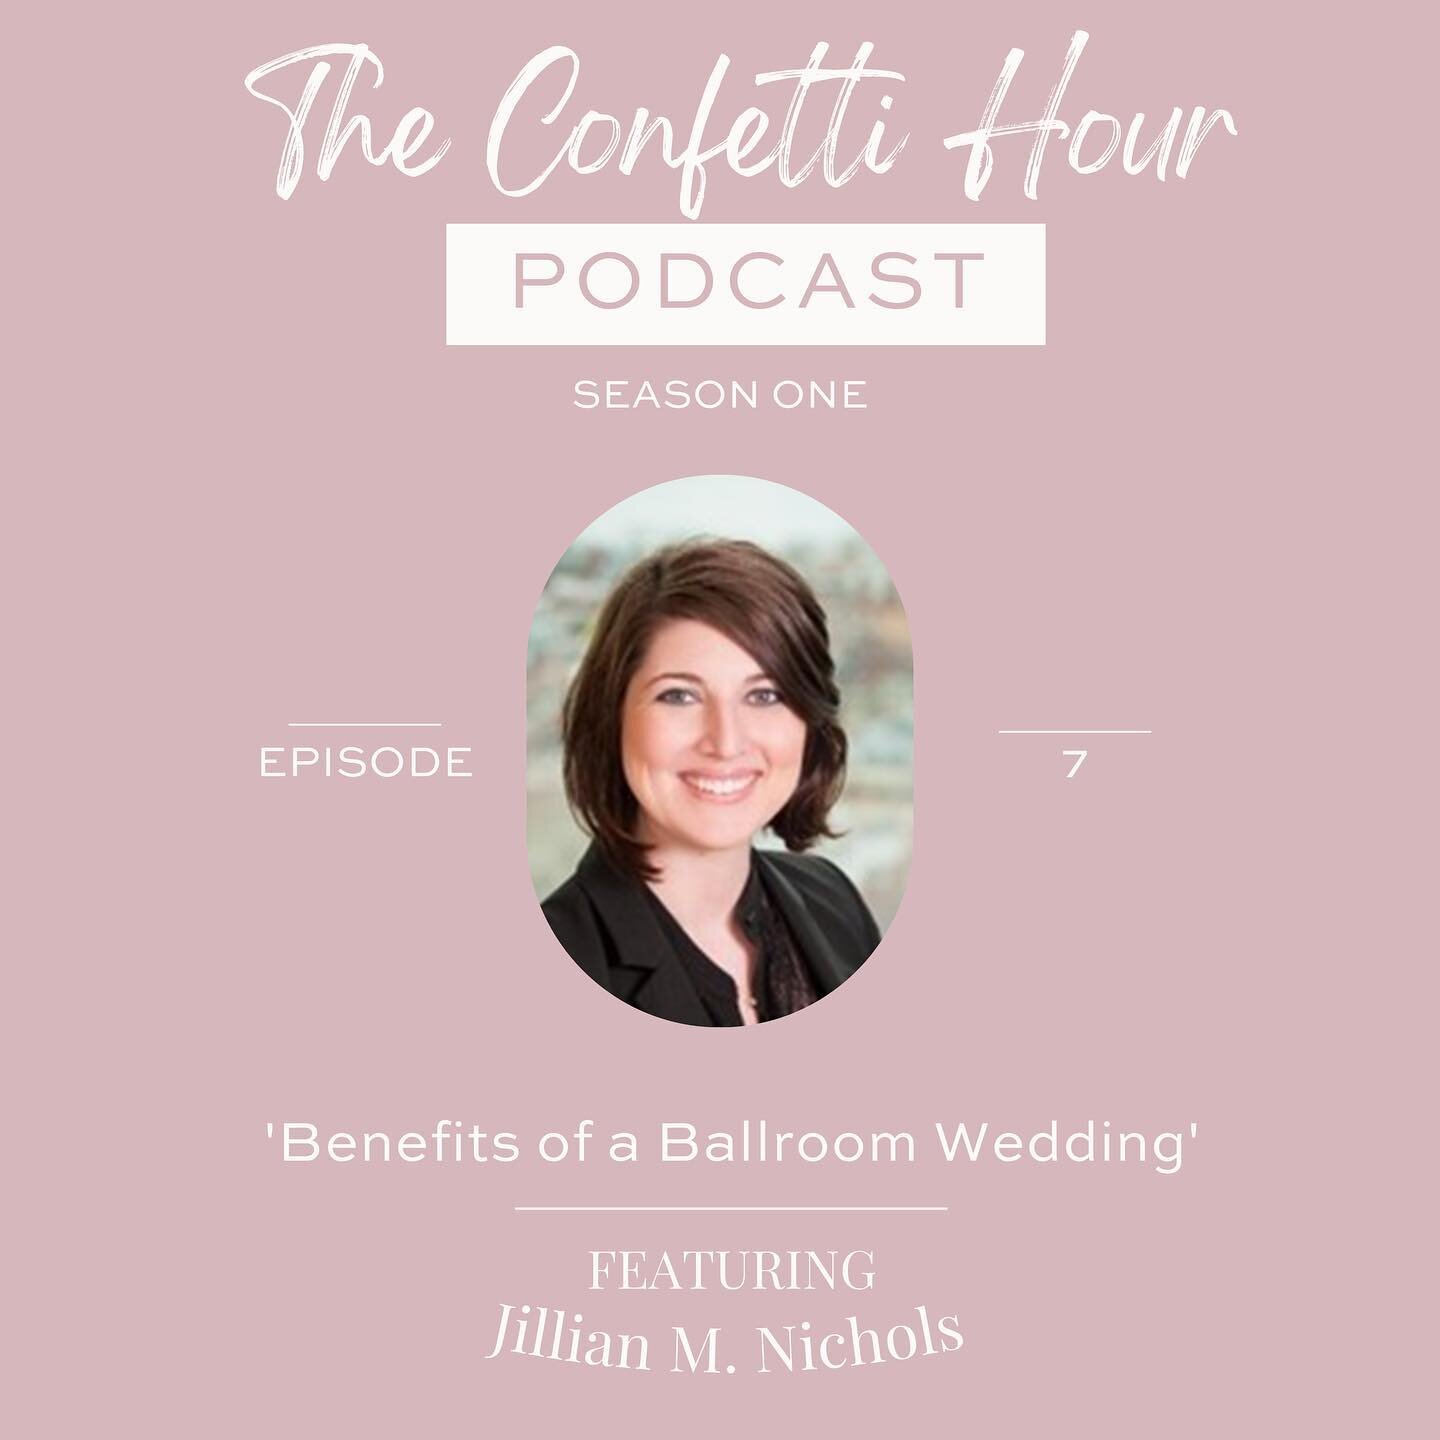 The Confetti Hour Podcast 🥂 Season 1, Episode 7 with the lovely @jillianmnic! 

Jillian M. Nichols is a tenured, professional, and driven Director of Catering and Conference Services. She lives and breathes hospitality and strives for 5-star service